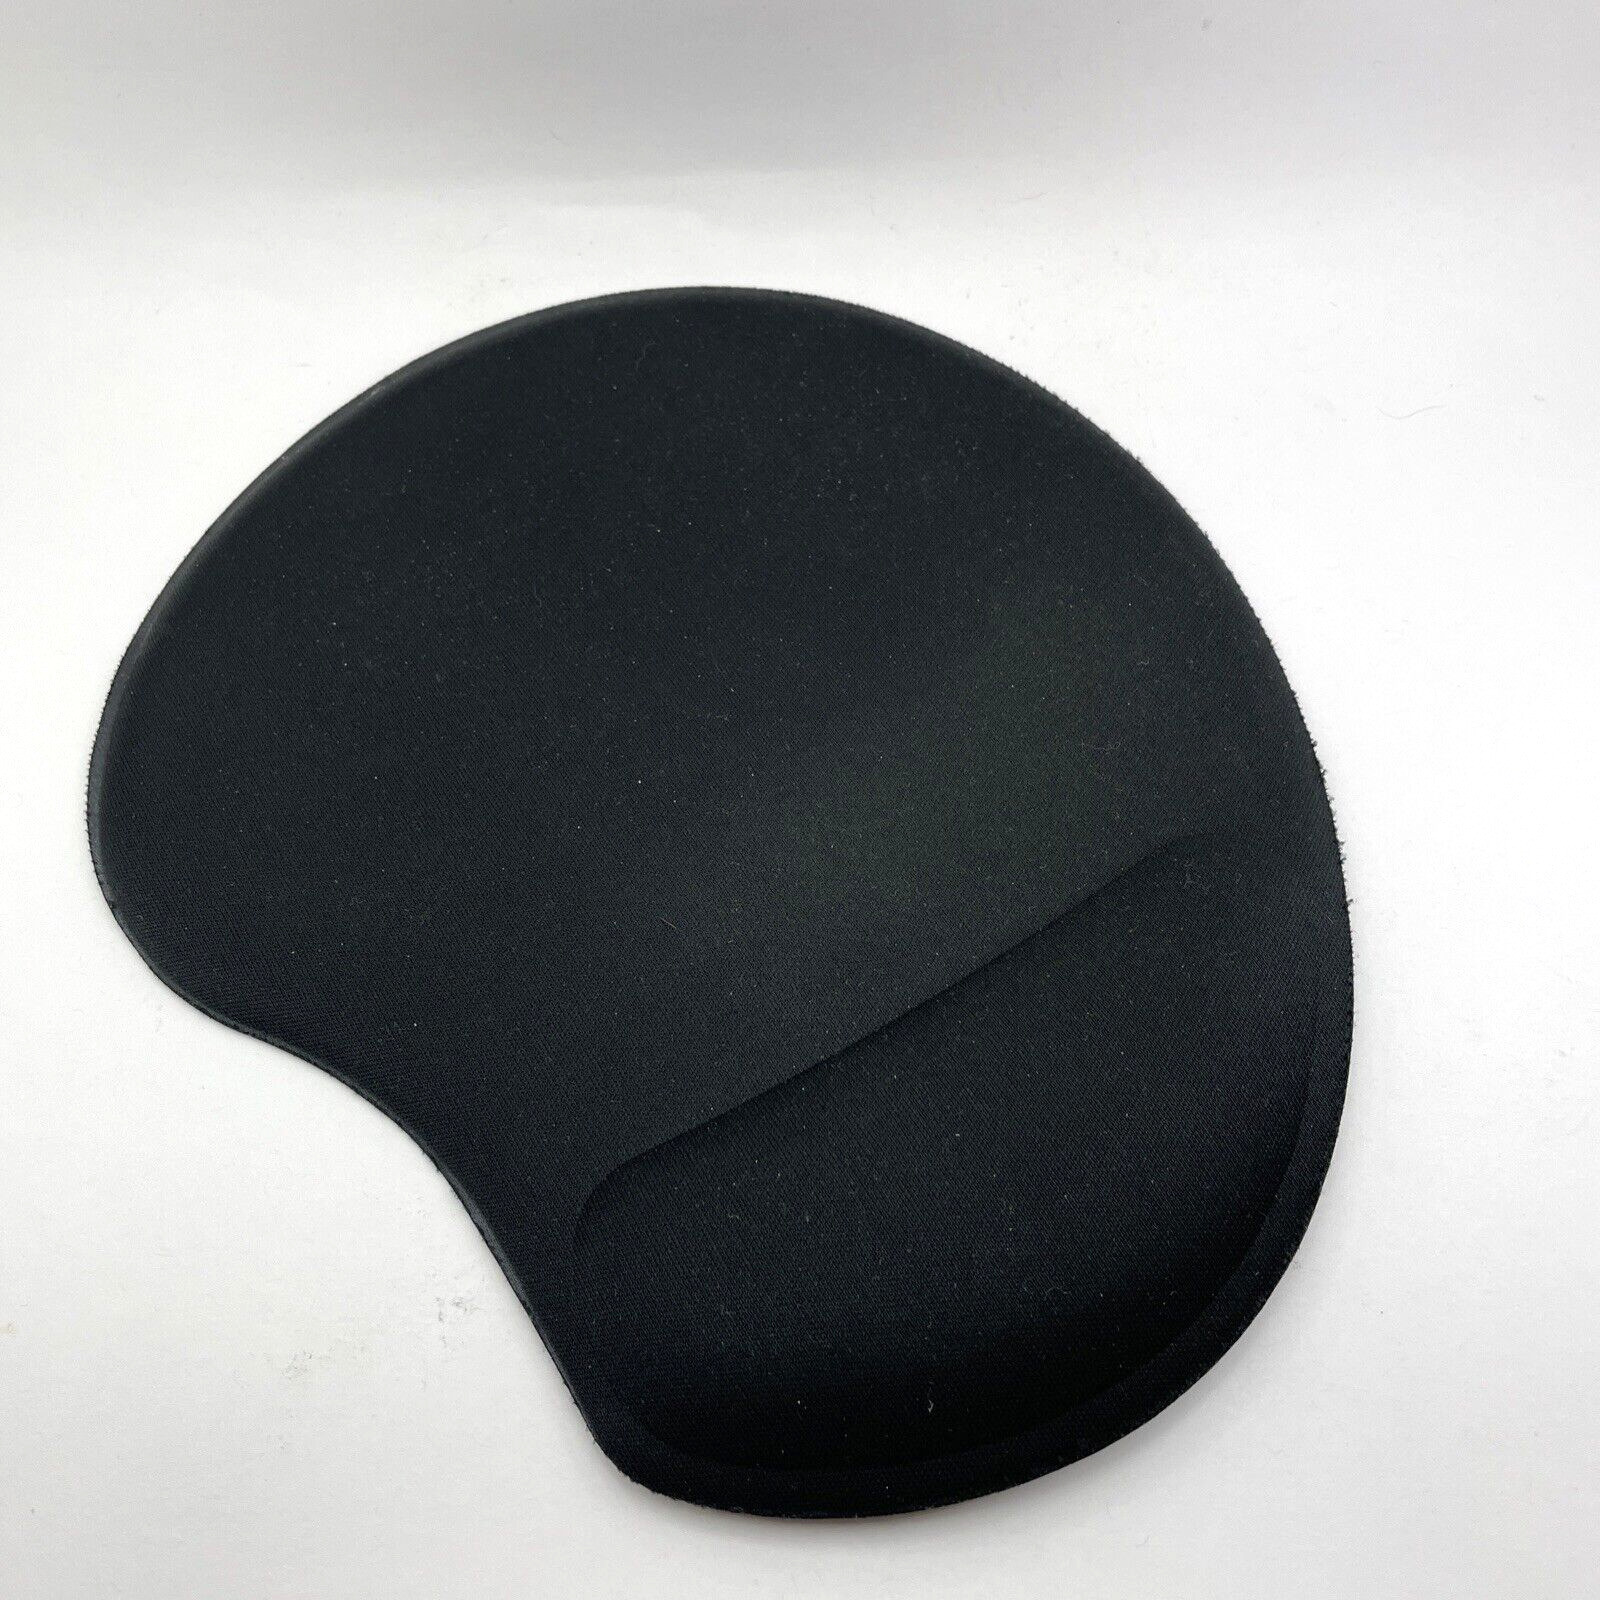 Black Fabric Mouse Pad w/ Wrist Support